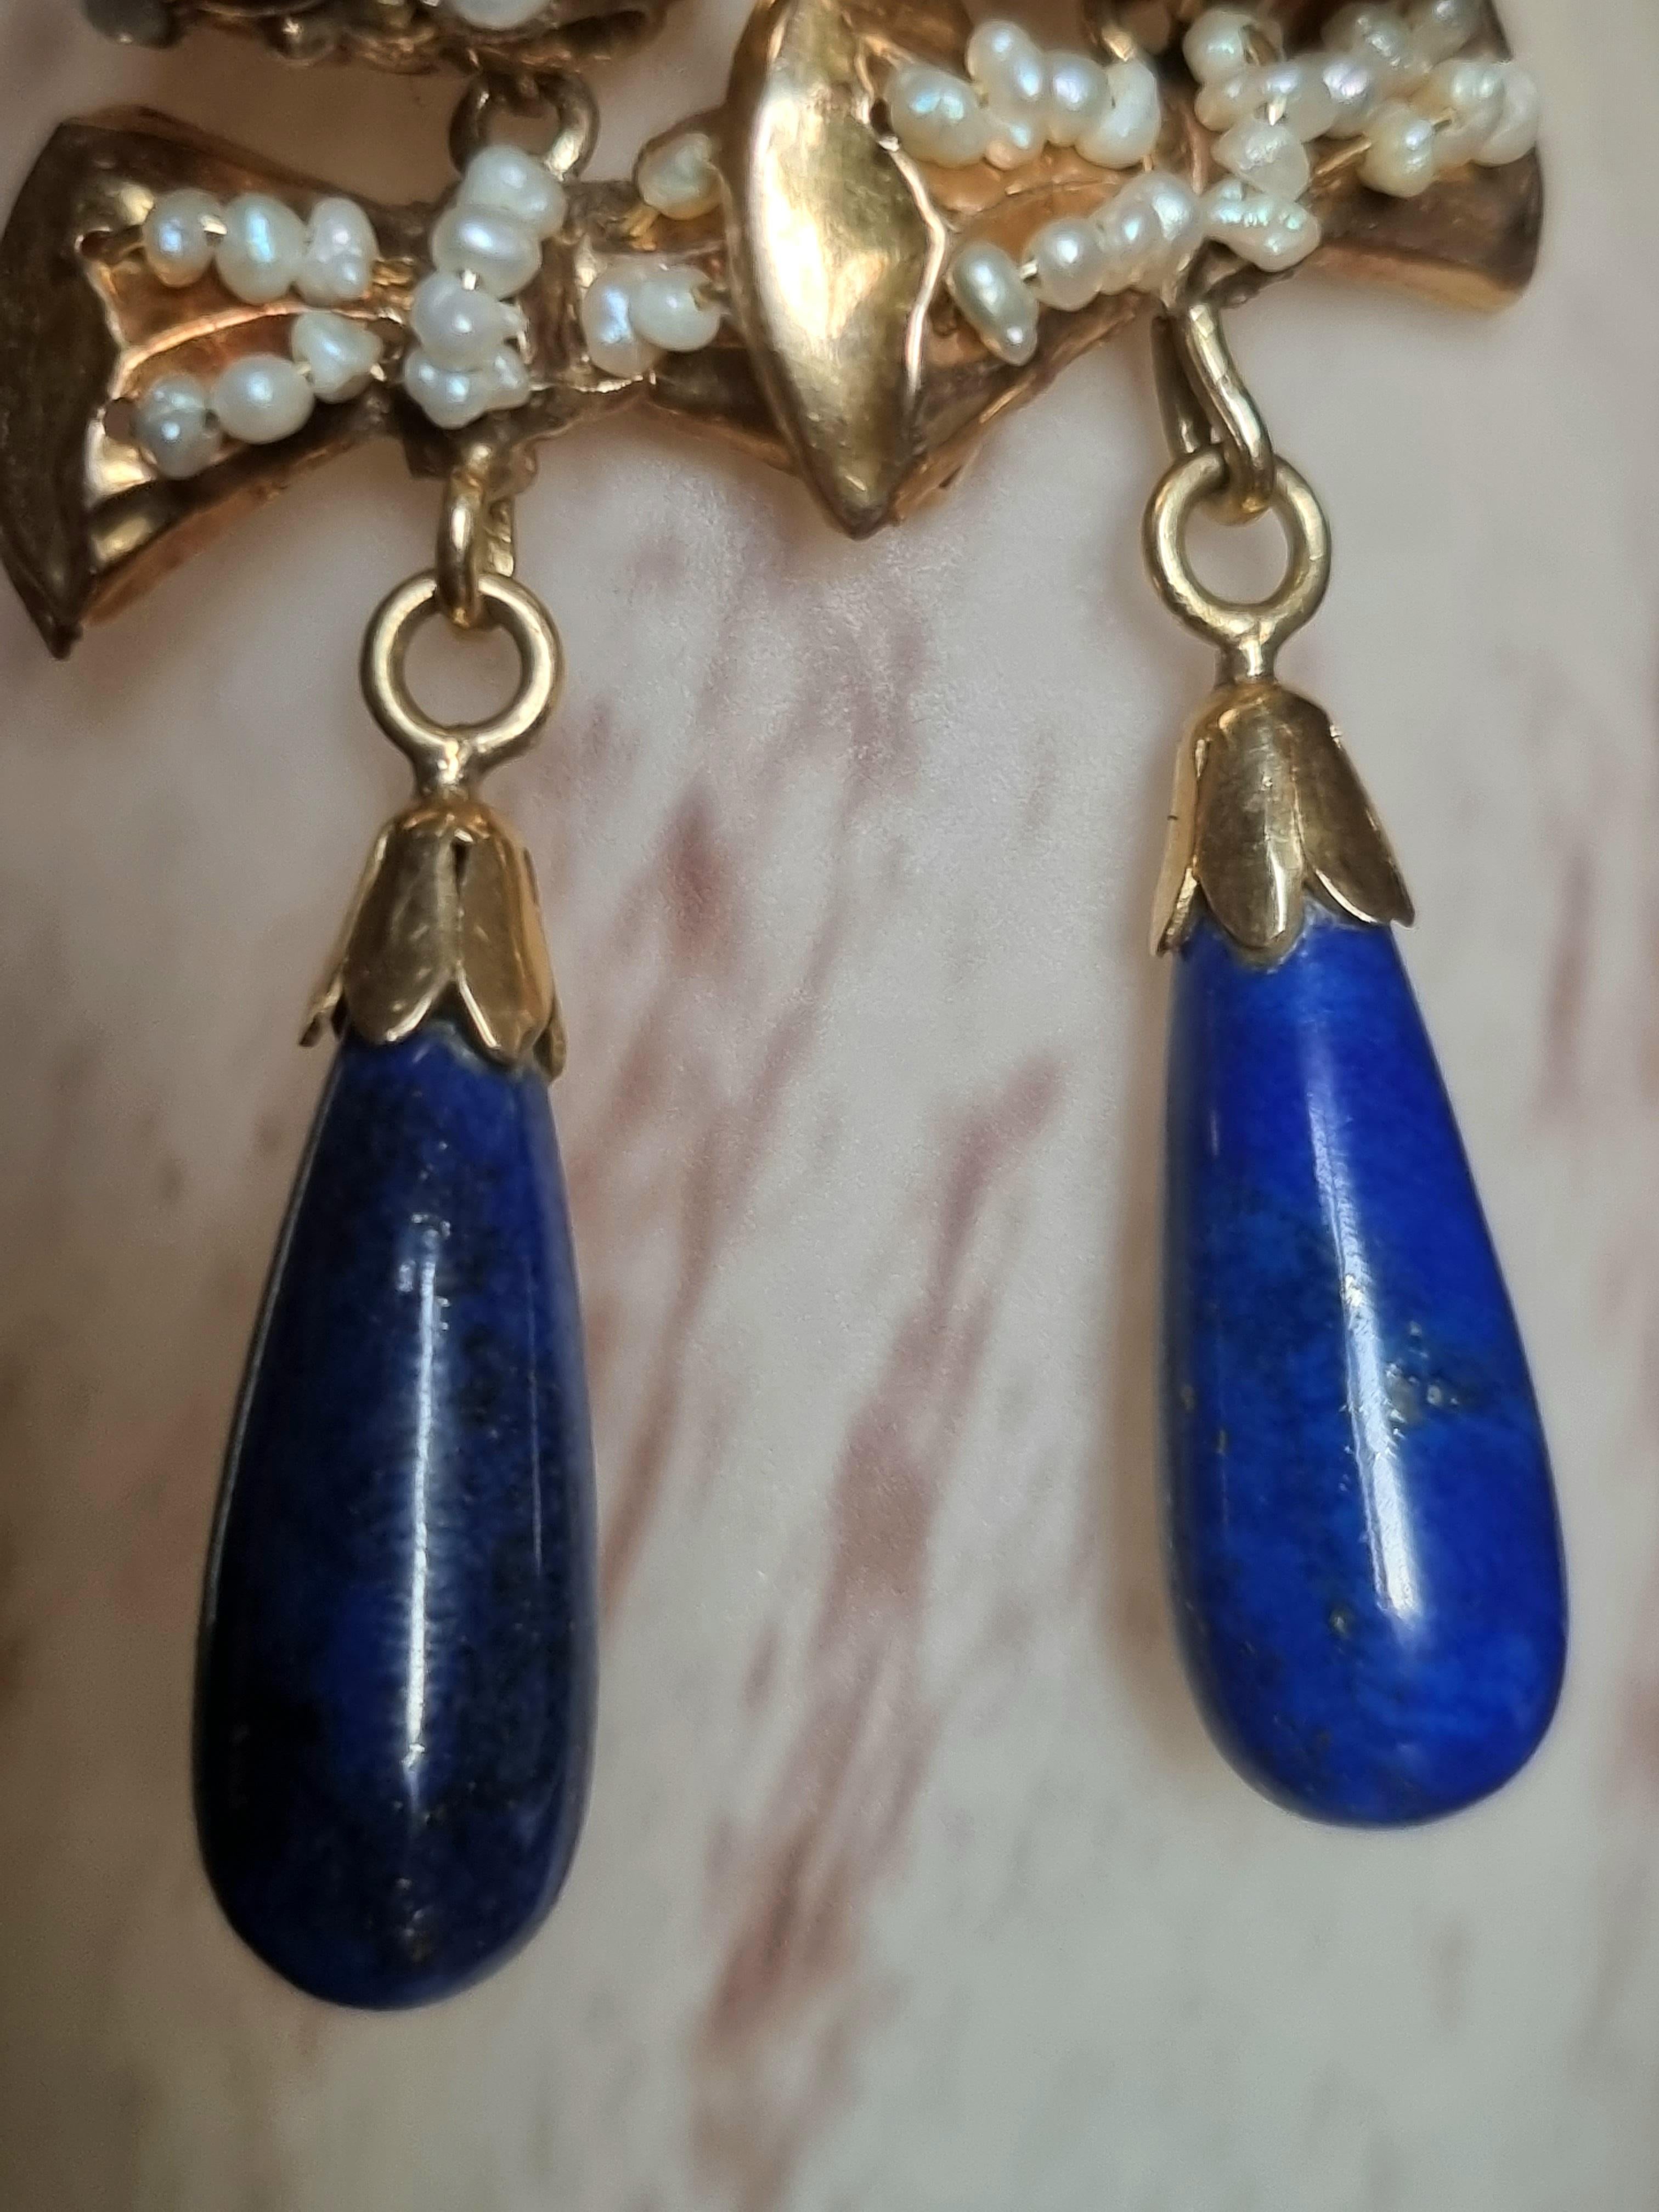 Cabochon Antique Iberian Lapis Lazuli & Seed Pearls 18 Karat Gold Pendant Bow Earrings For Sale